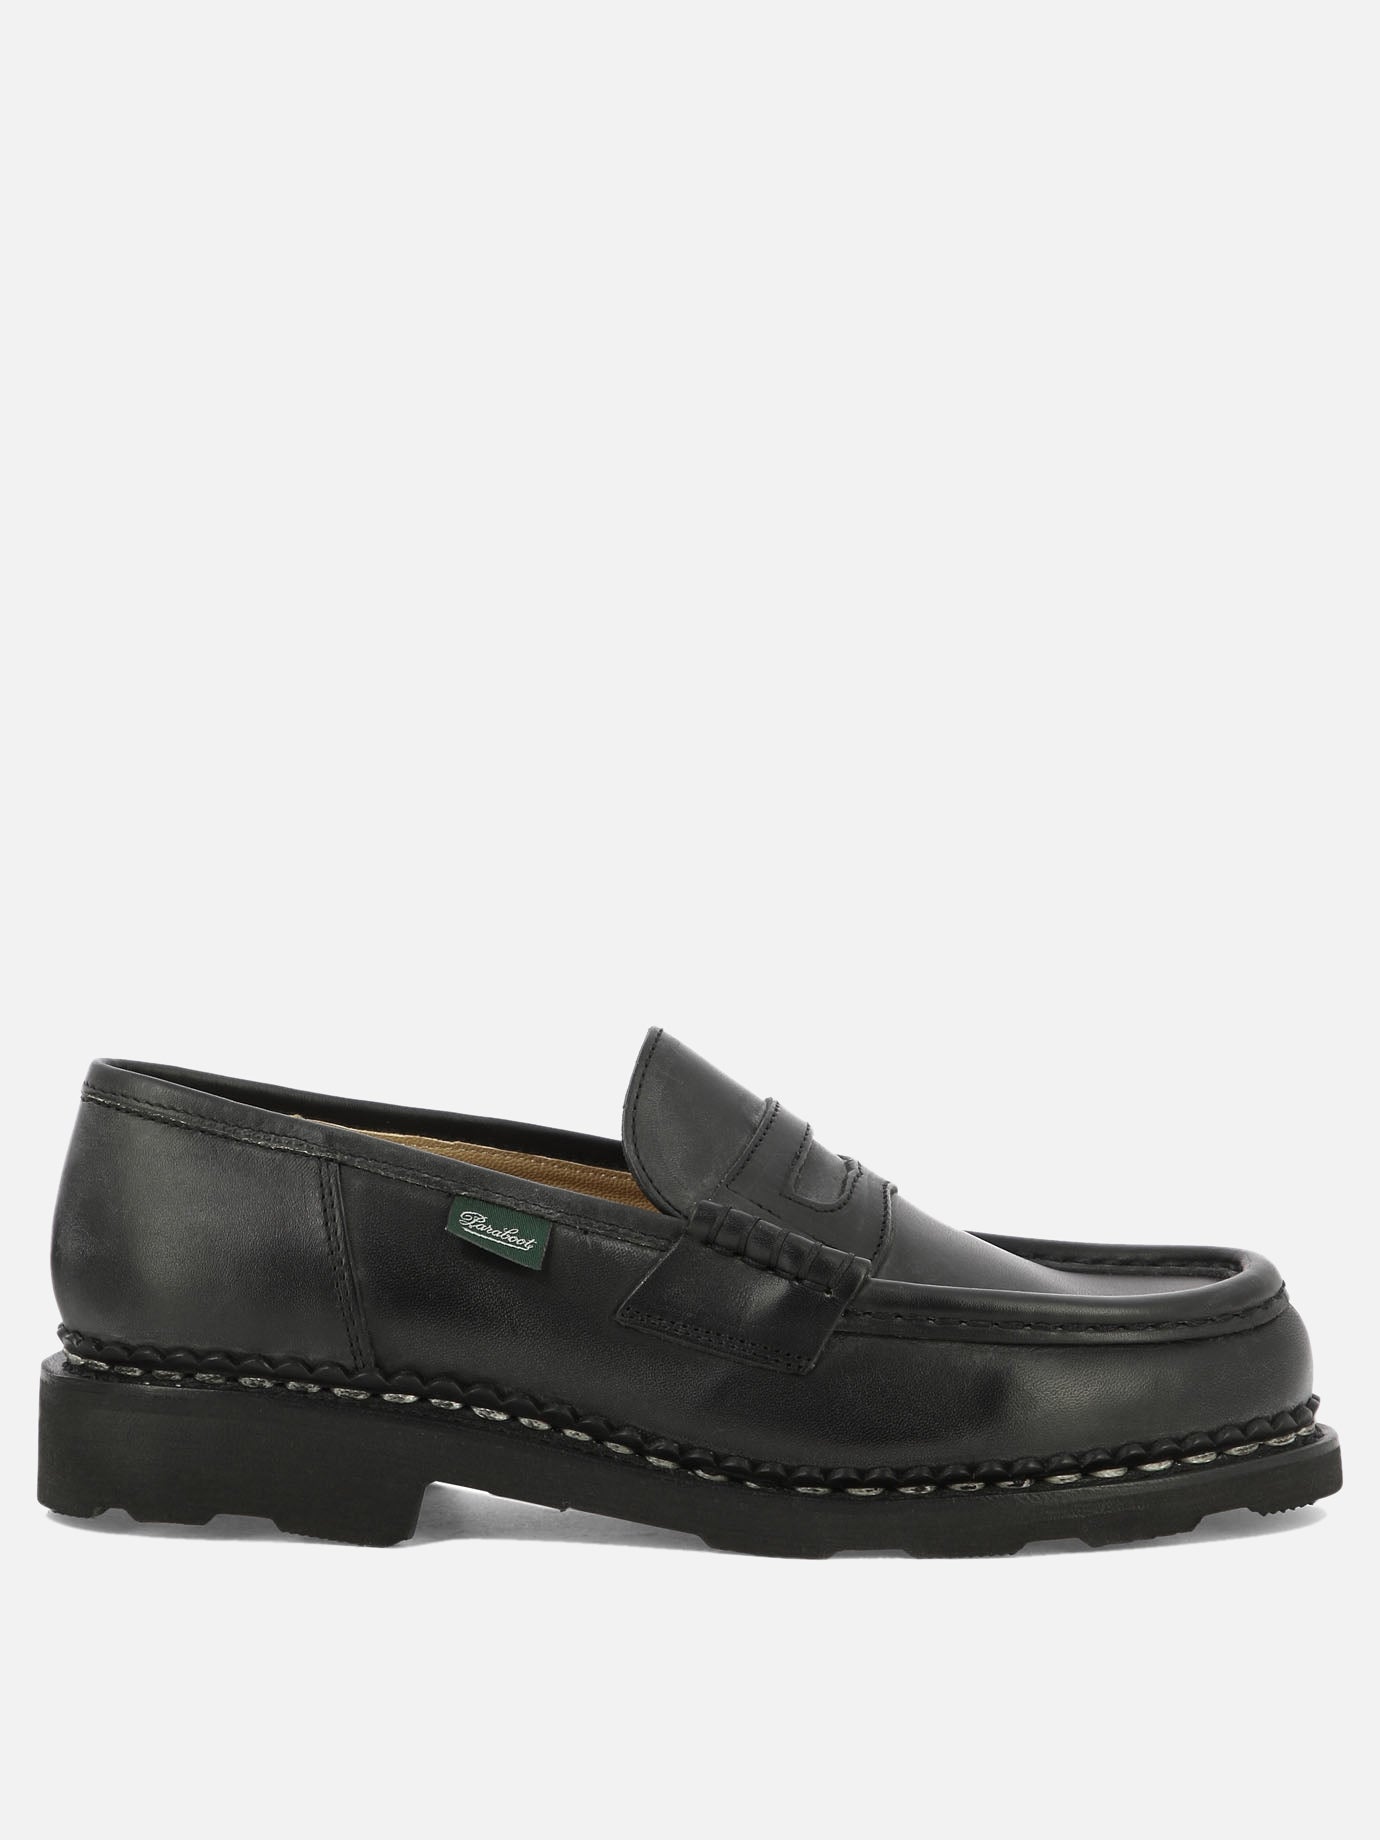 "Orsay Griff II" loafers